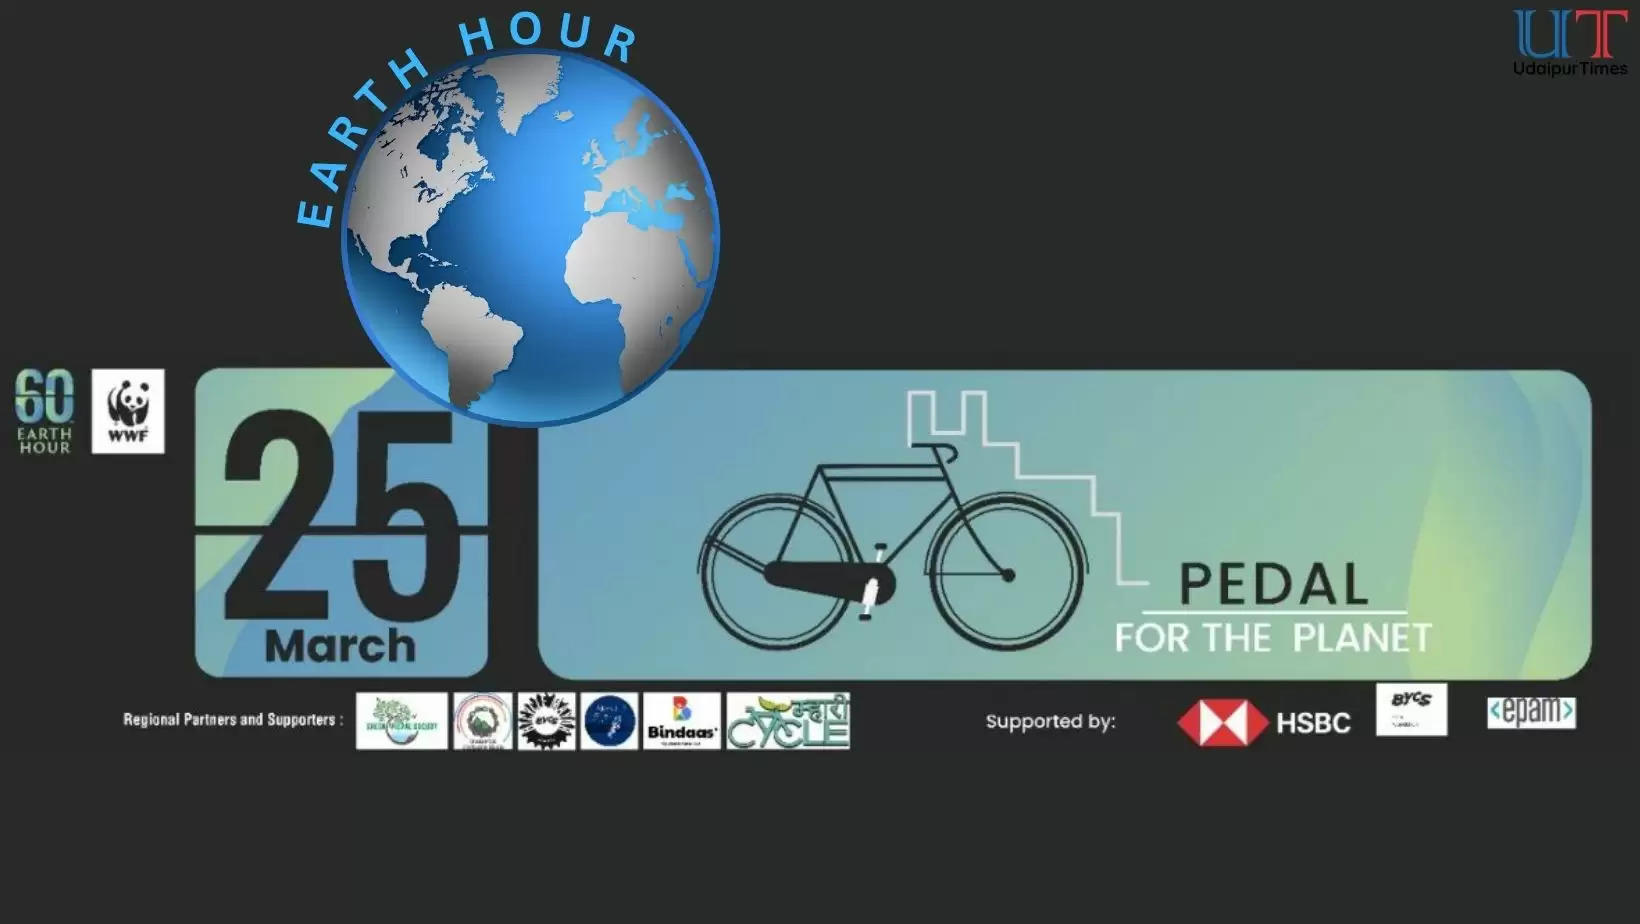 Earth Hour Pedal for the Planet  Cyclothon at Udaipur, Events at Udaipur